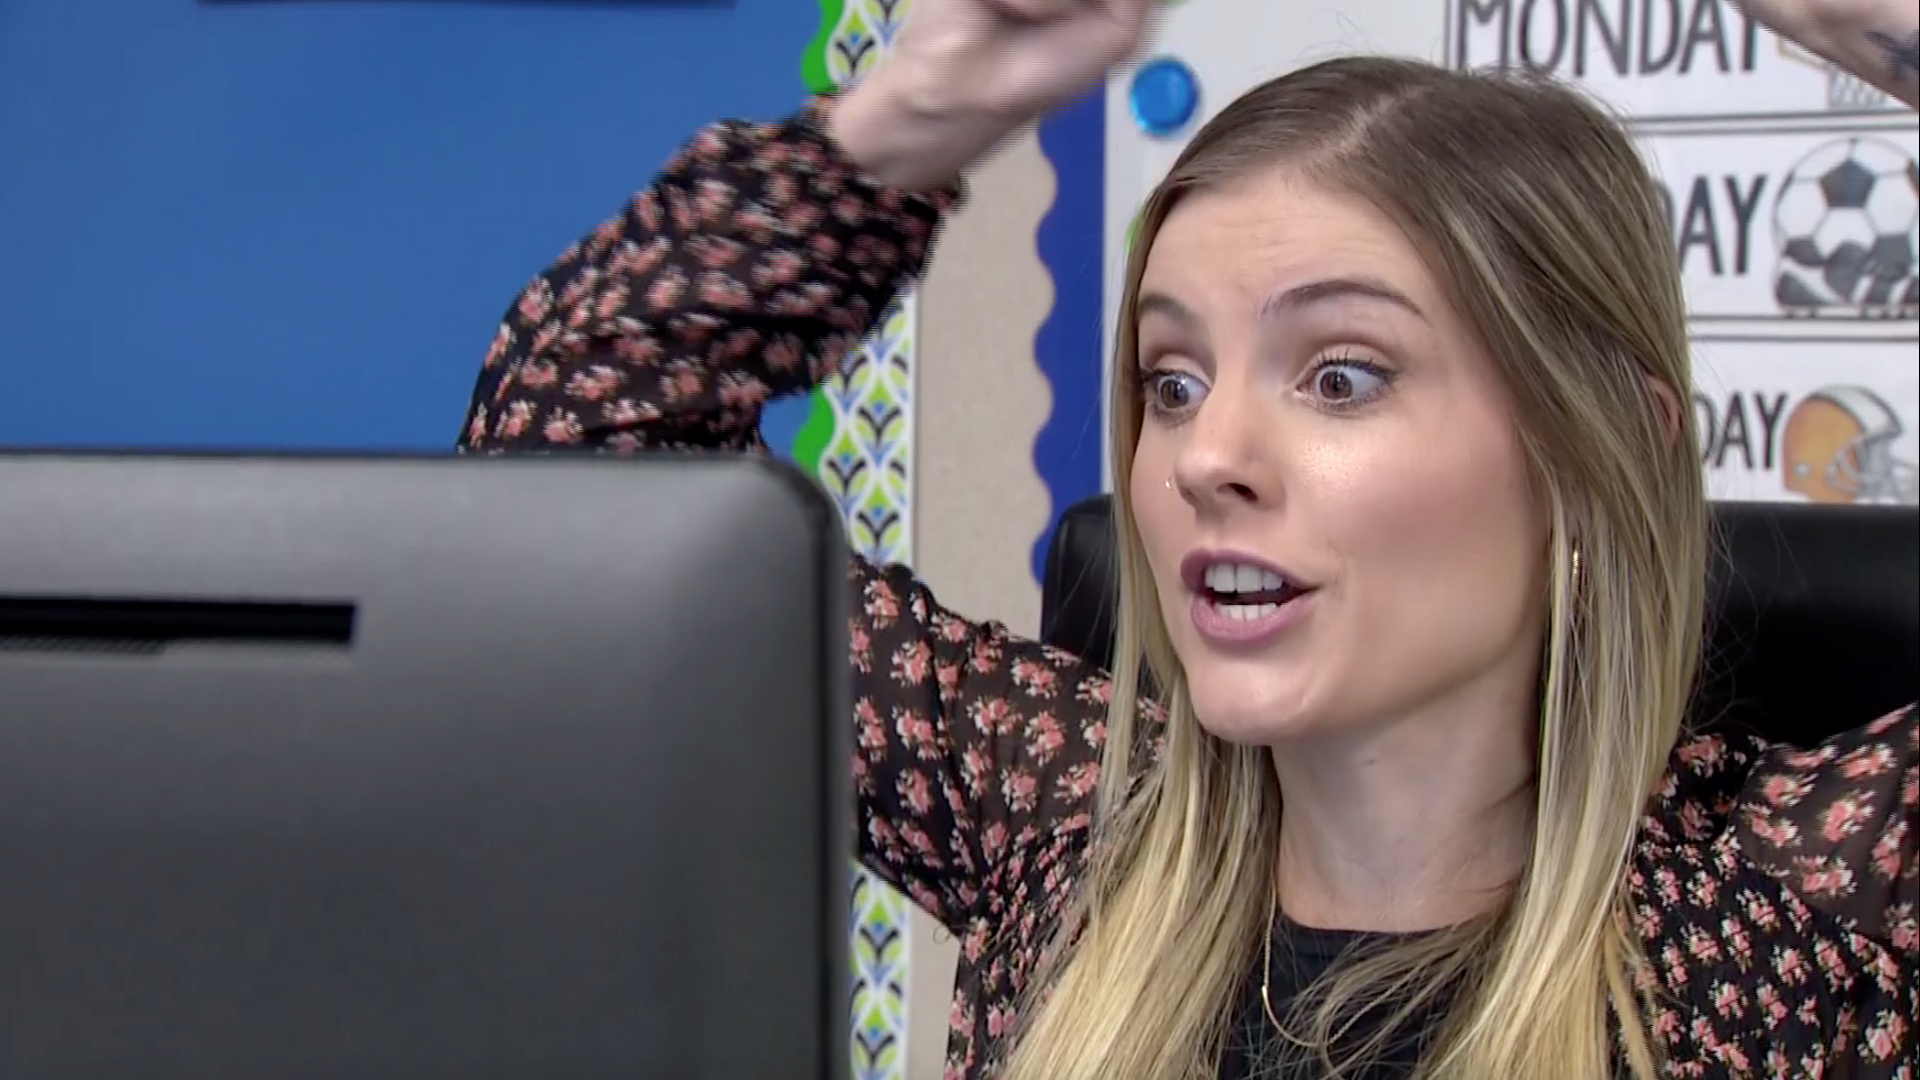 From TikTok to the Today Show, Mackenzie Adams has gained fans for her relentlessly upbeat teaching style.